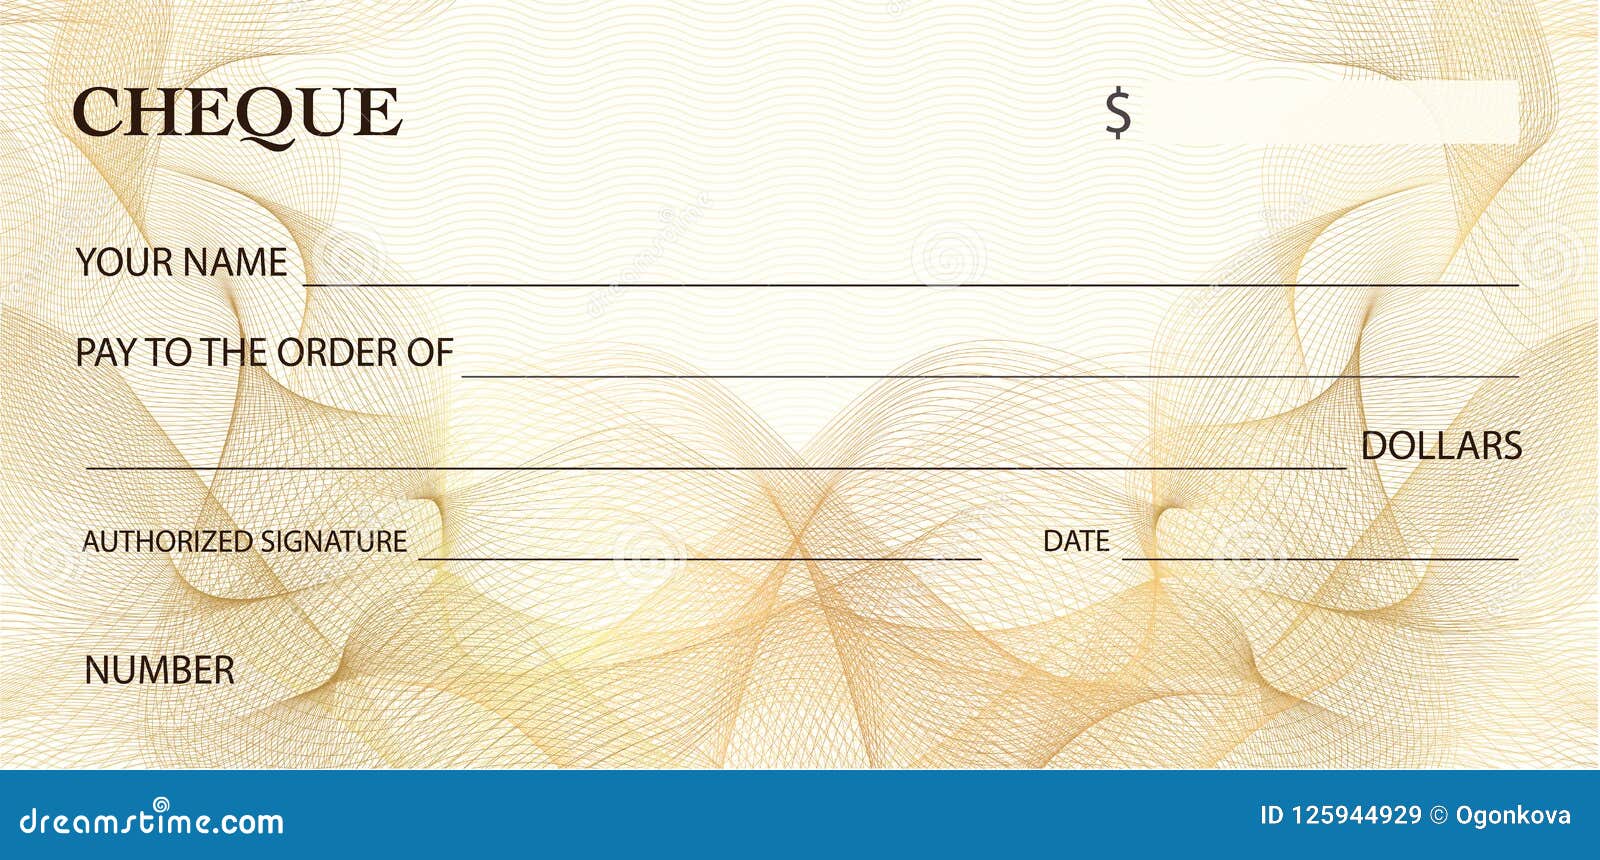 check cheque, chequebook template. gold lines pattern guilloche watermark